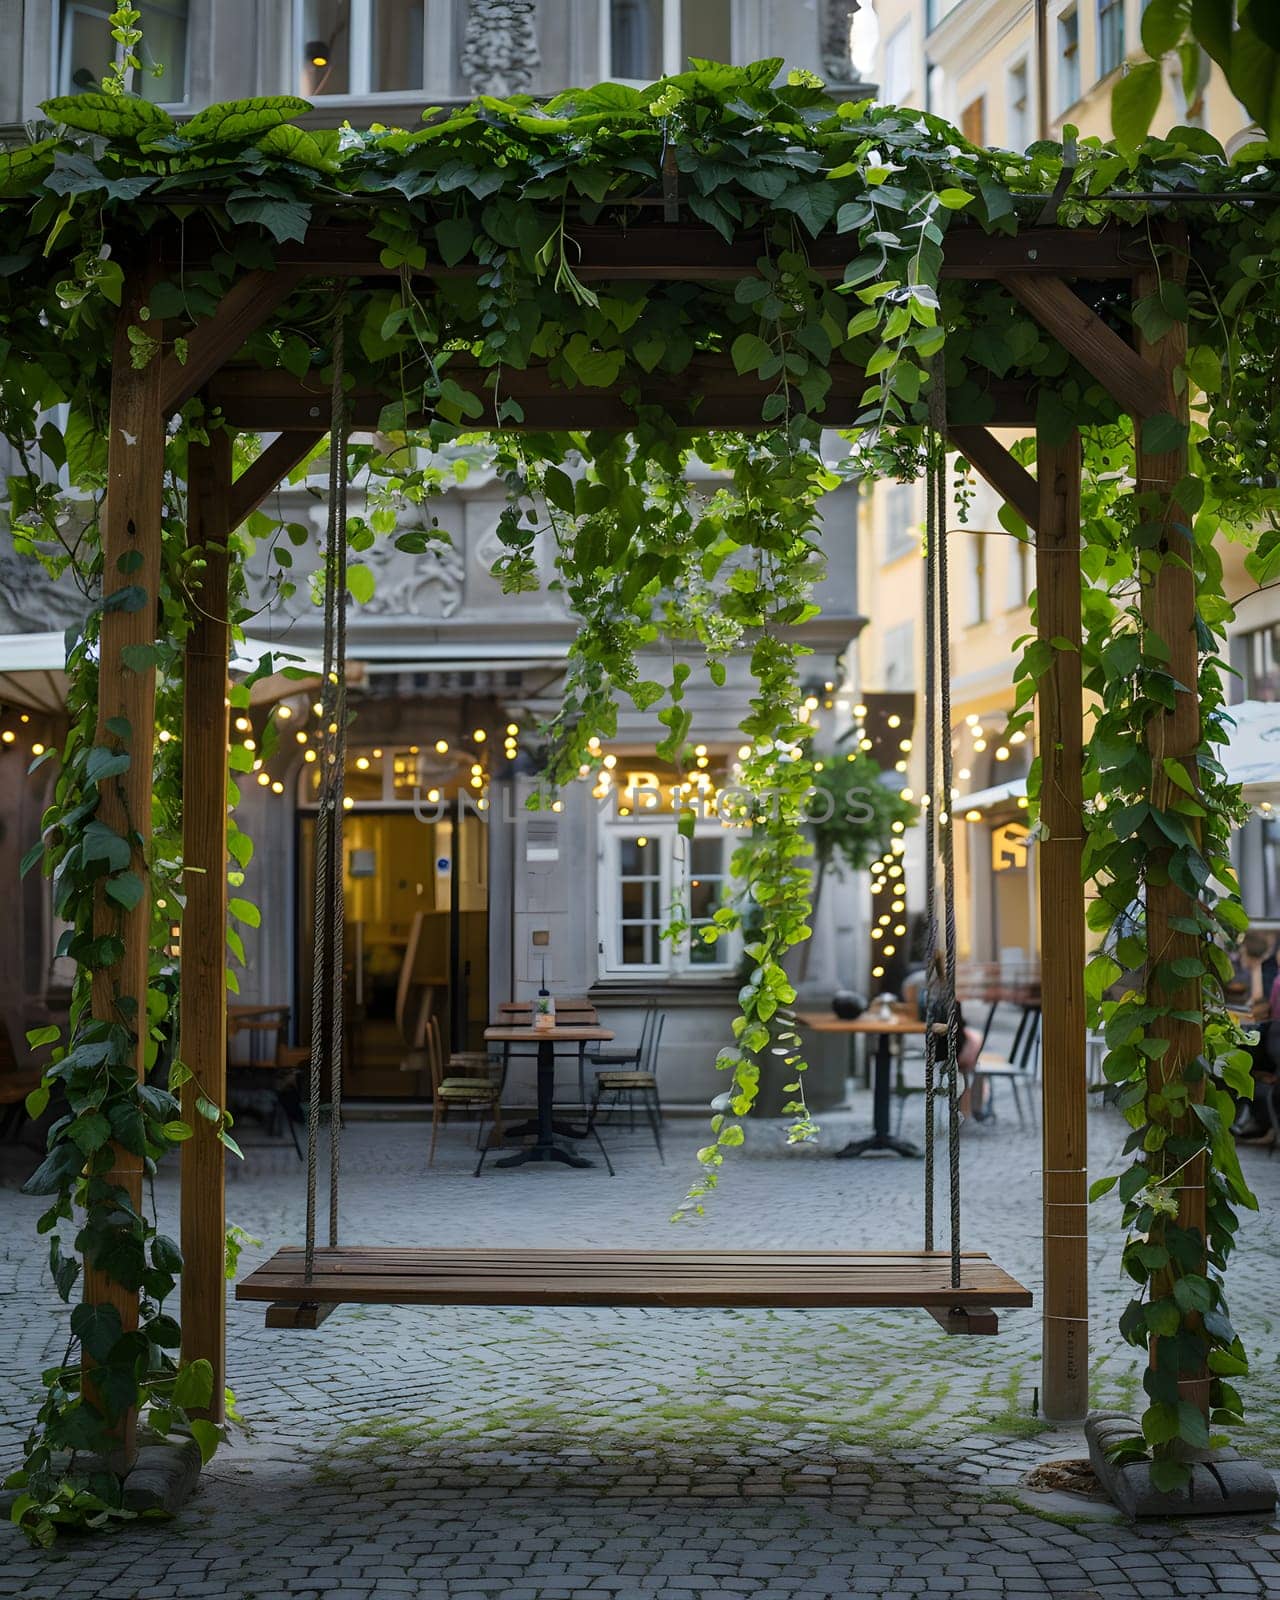 Wooden swing adorned with ivy, creating a charming facade by Nadtochiy